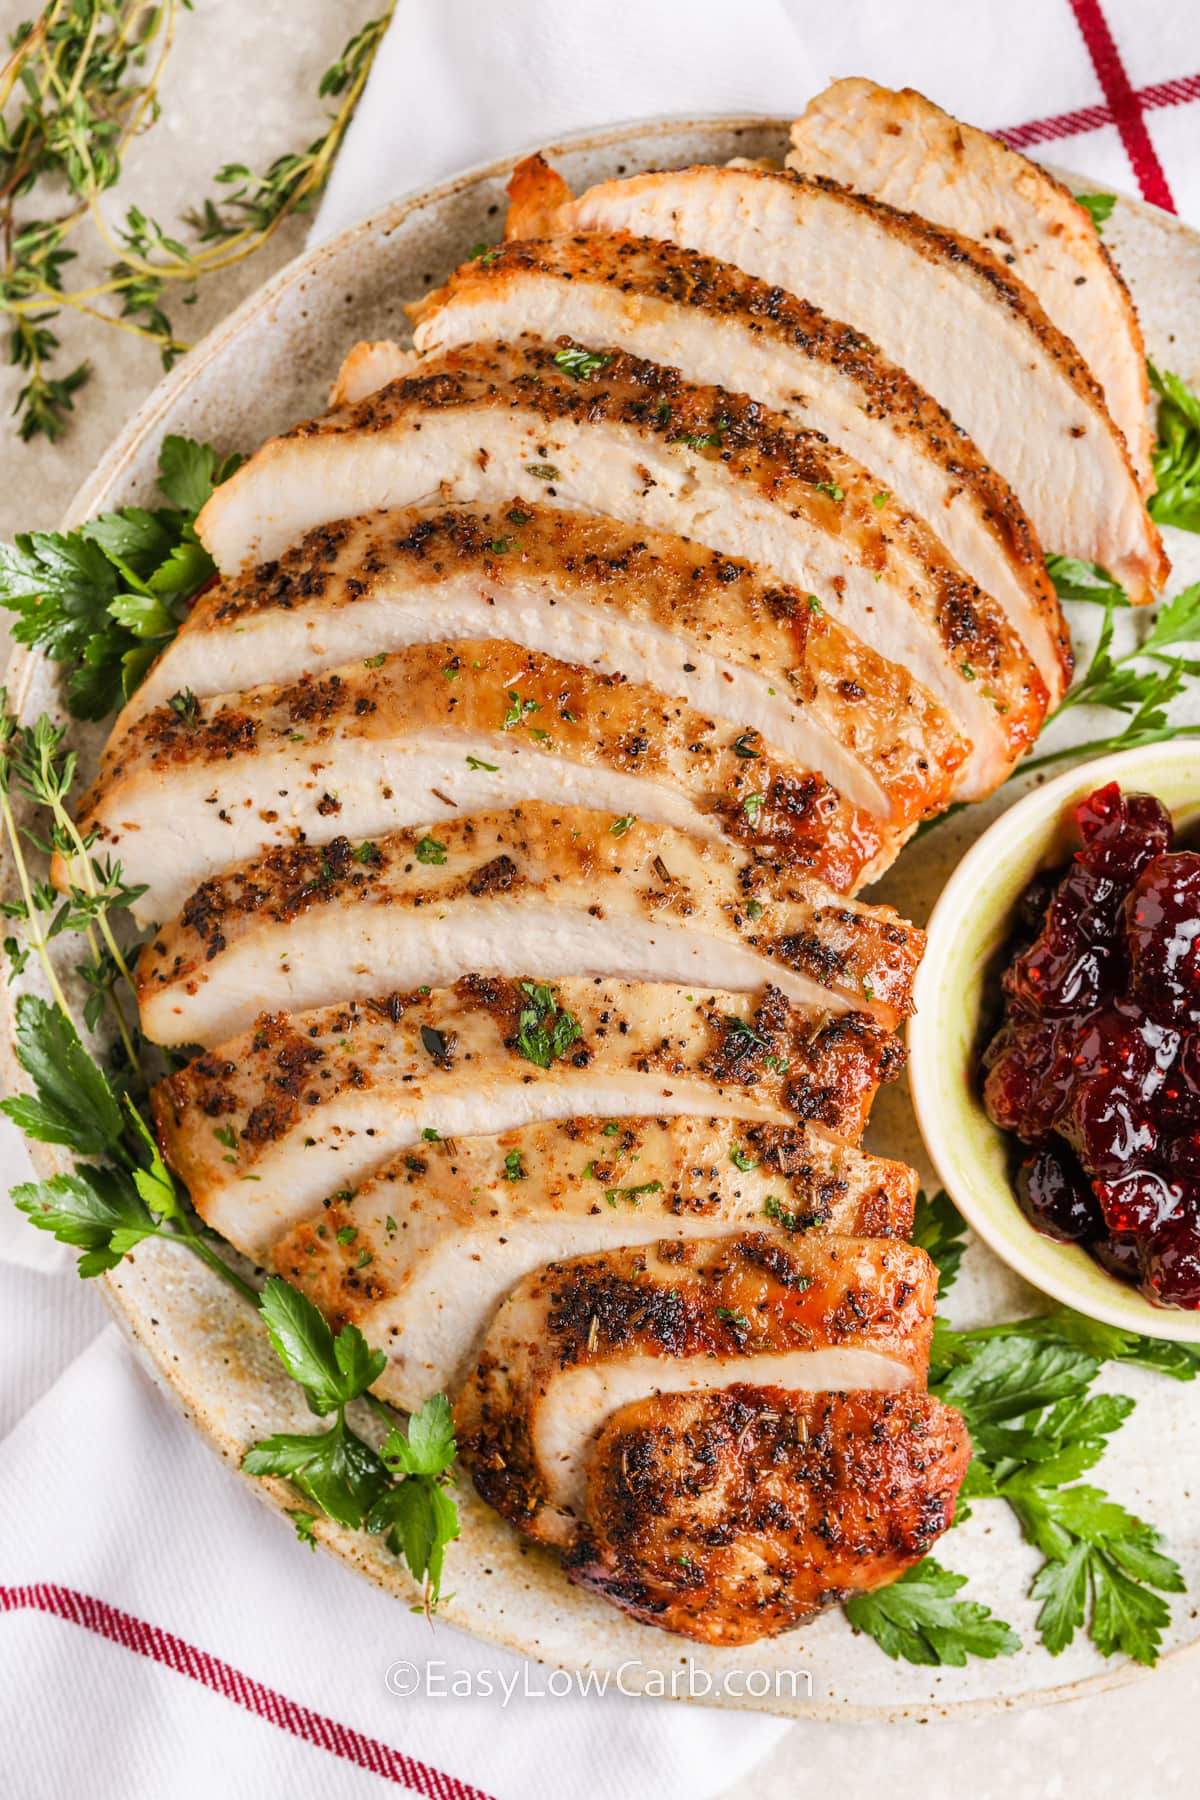 A serving plate with crockpot turkey breast on it.